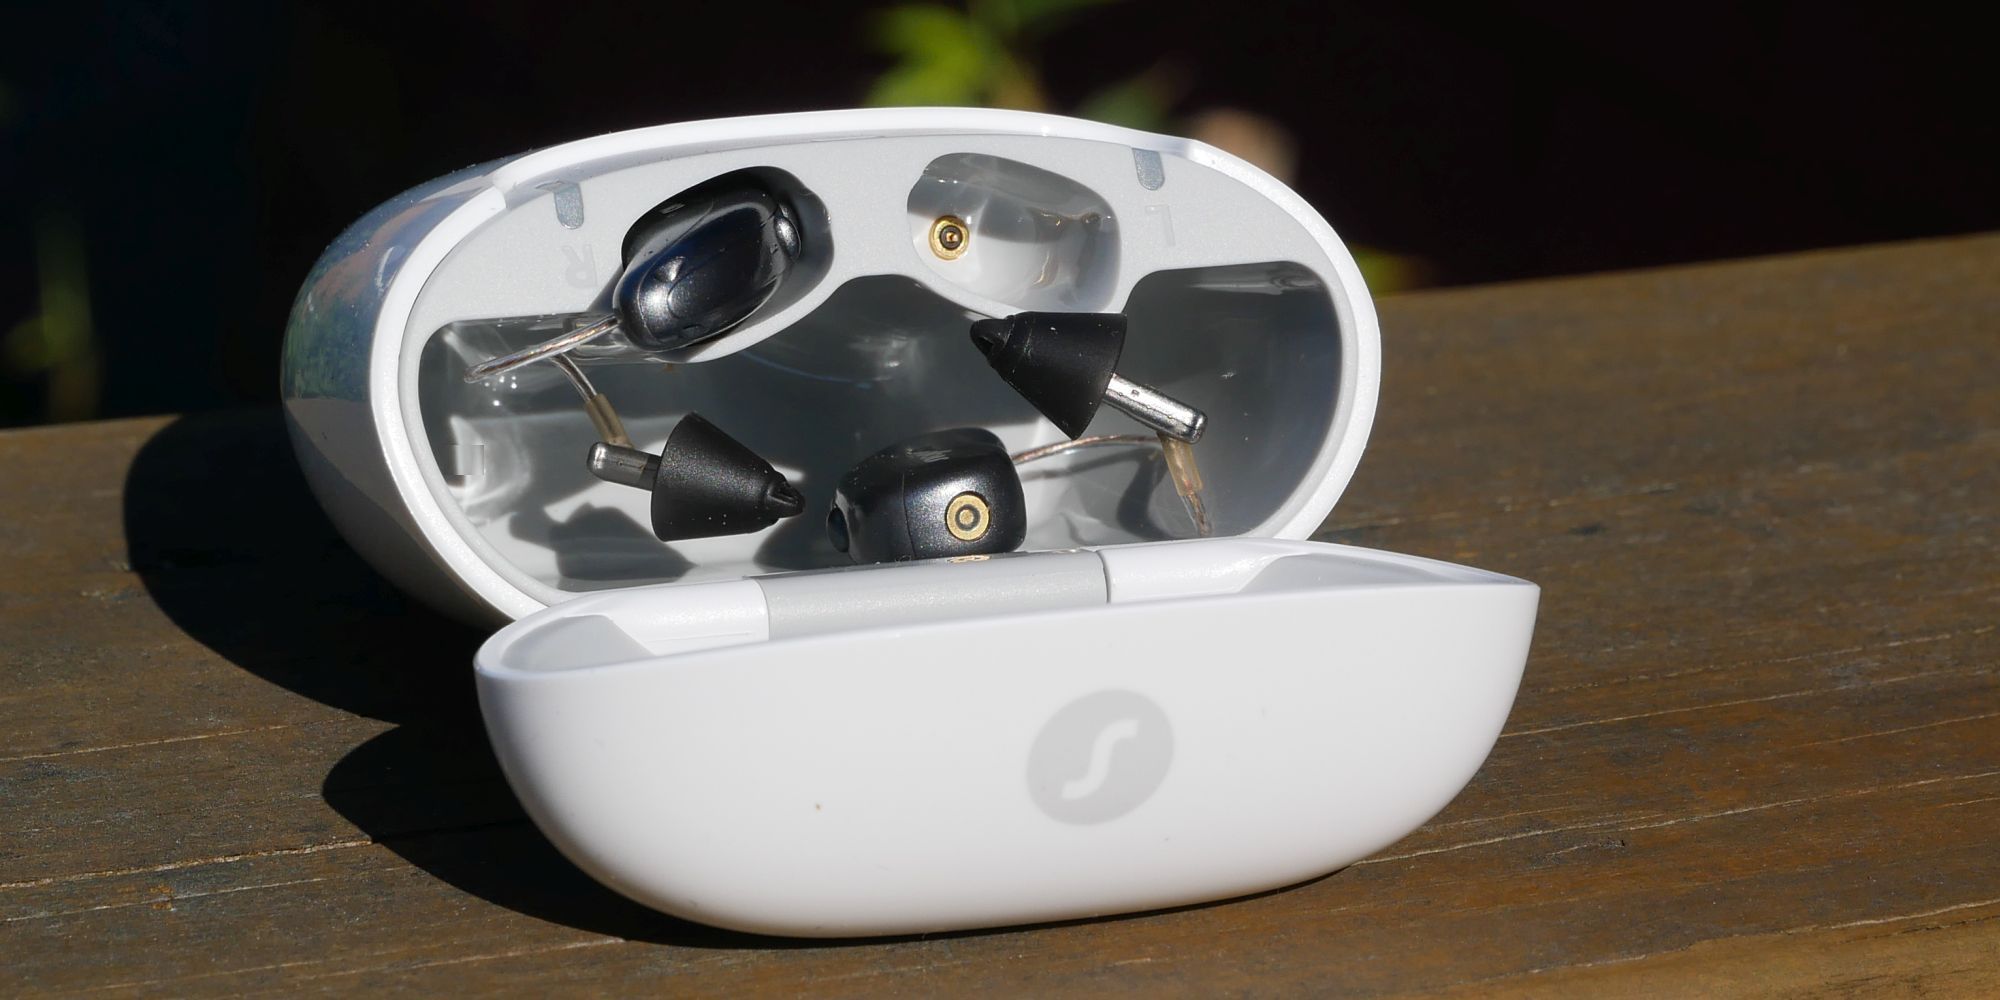 Signia Pure Charge&amp;Go AX hearing aids in portable charging case.